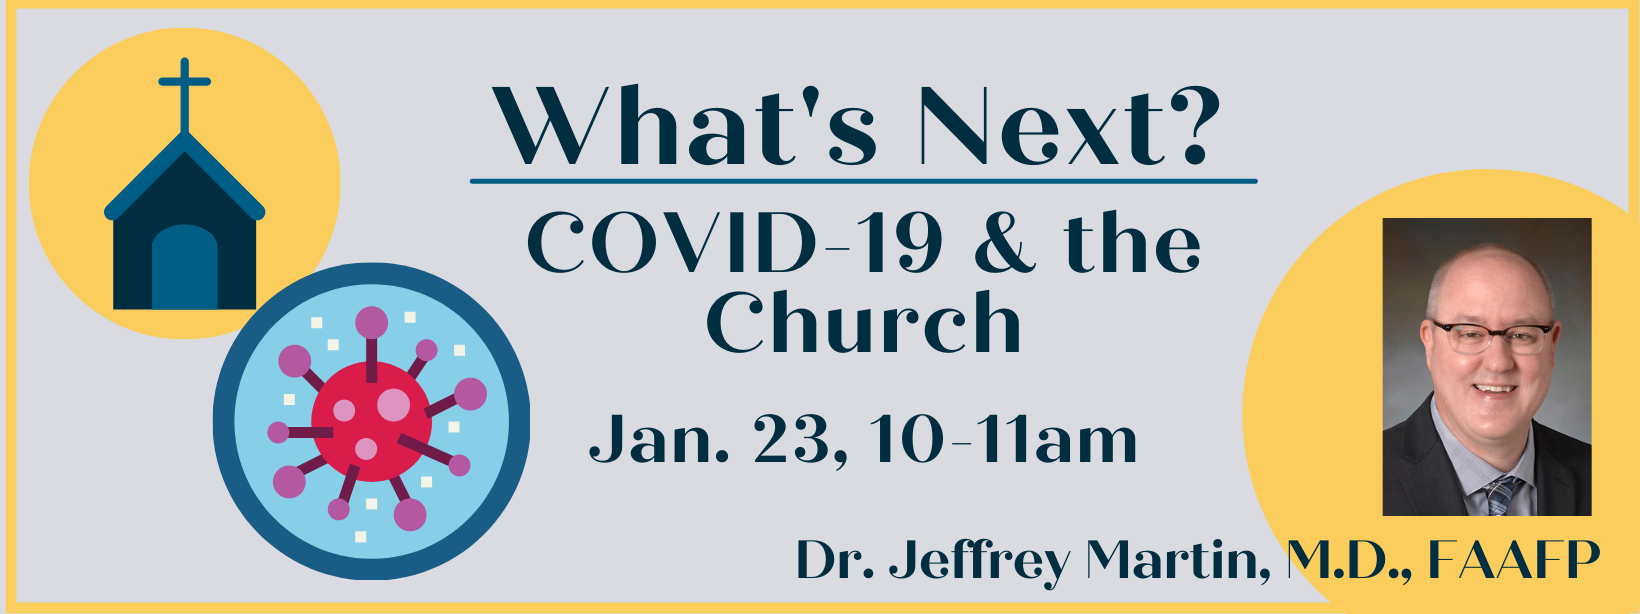 What’s Next? COVID-19 and the Church